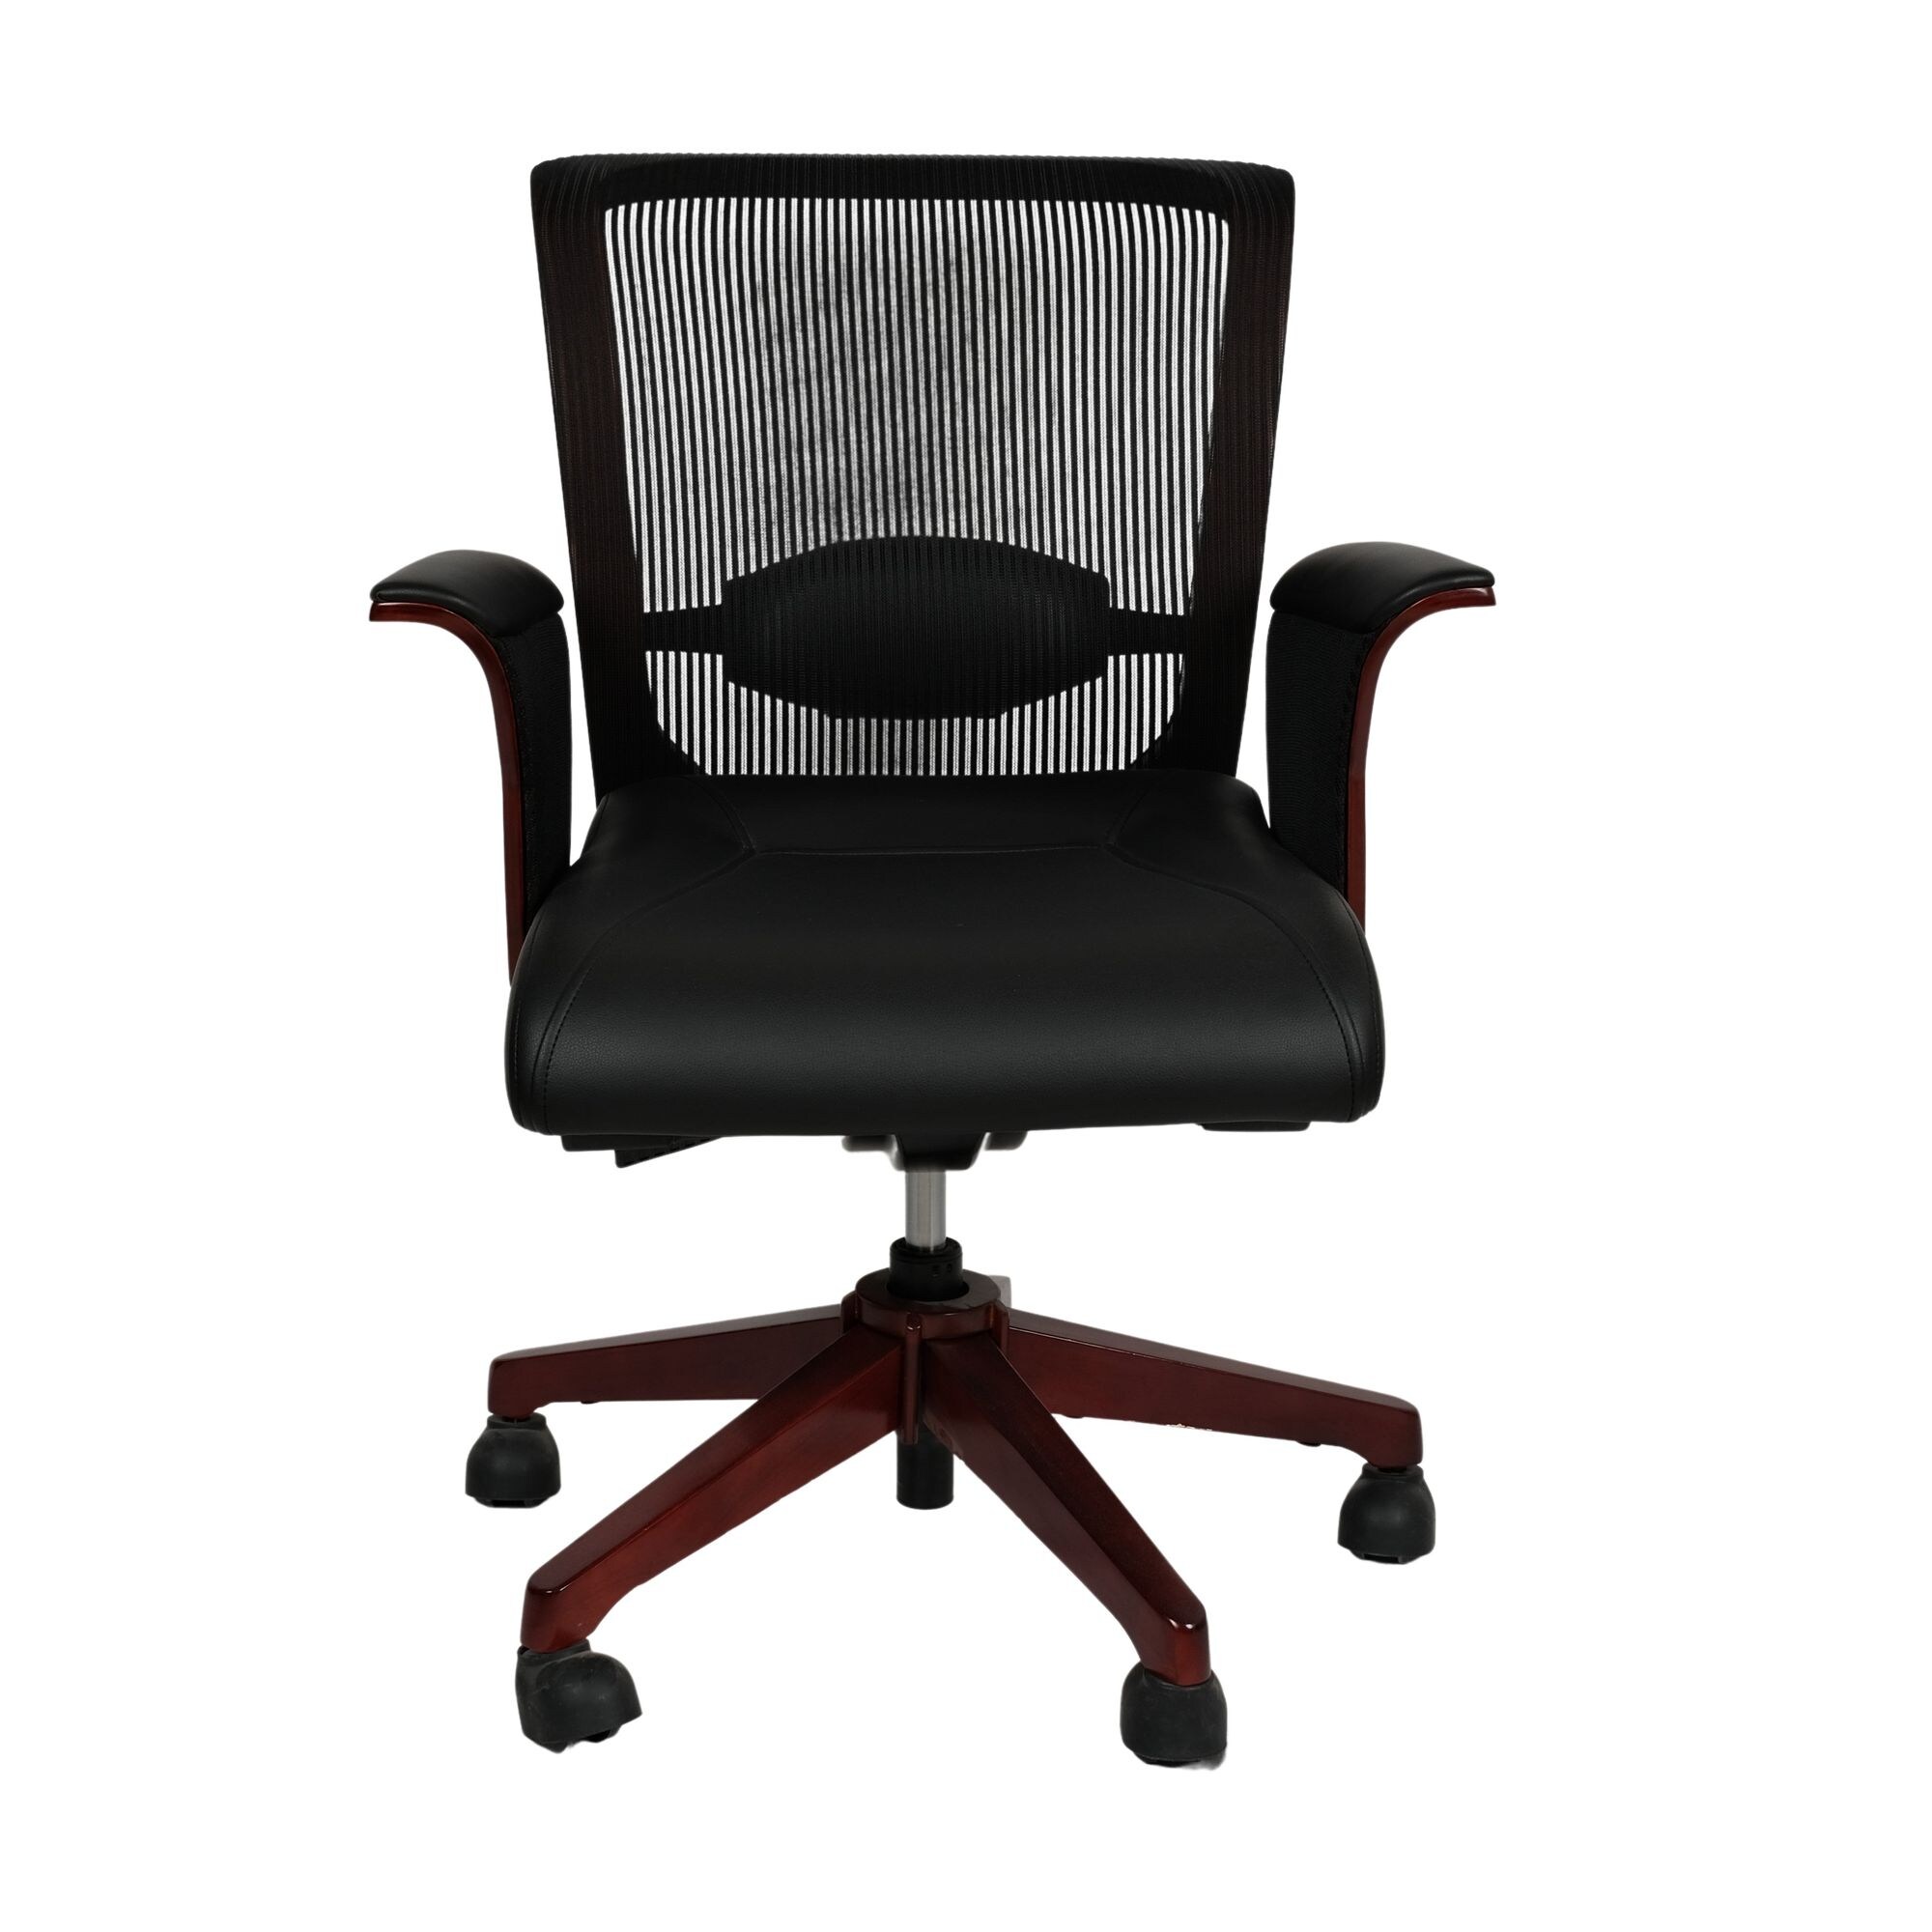 Exotic Chairs Adjustable Mediumback Executive Office Chair, Casvo Black